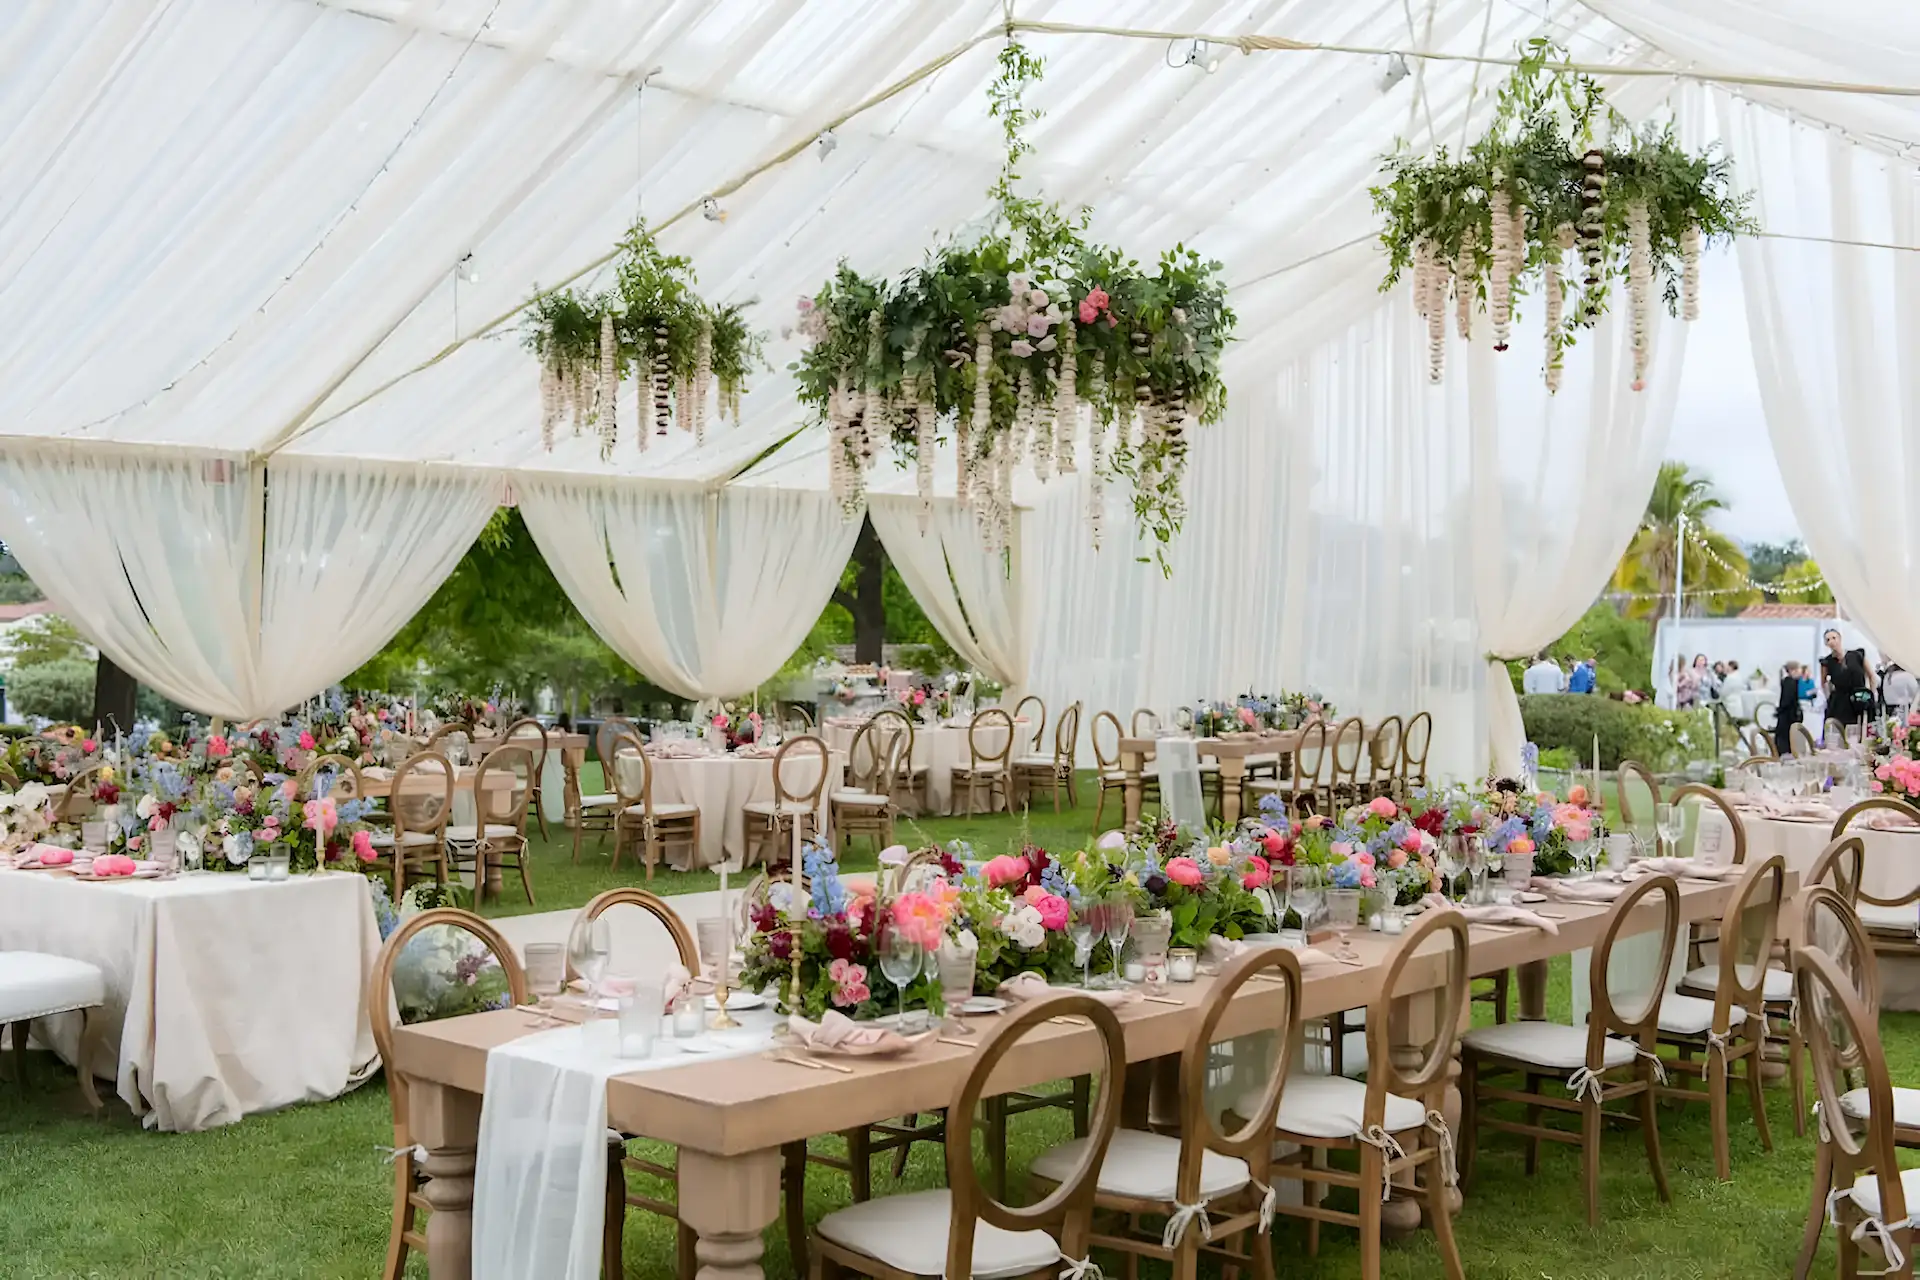 Wedding prepared in a tent waiting for the guests, decorated with flowers